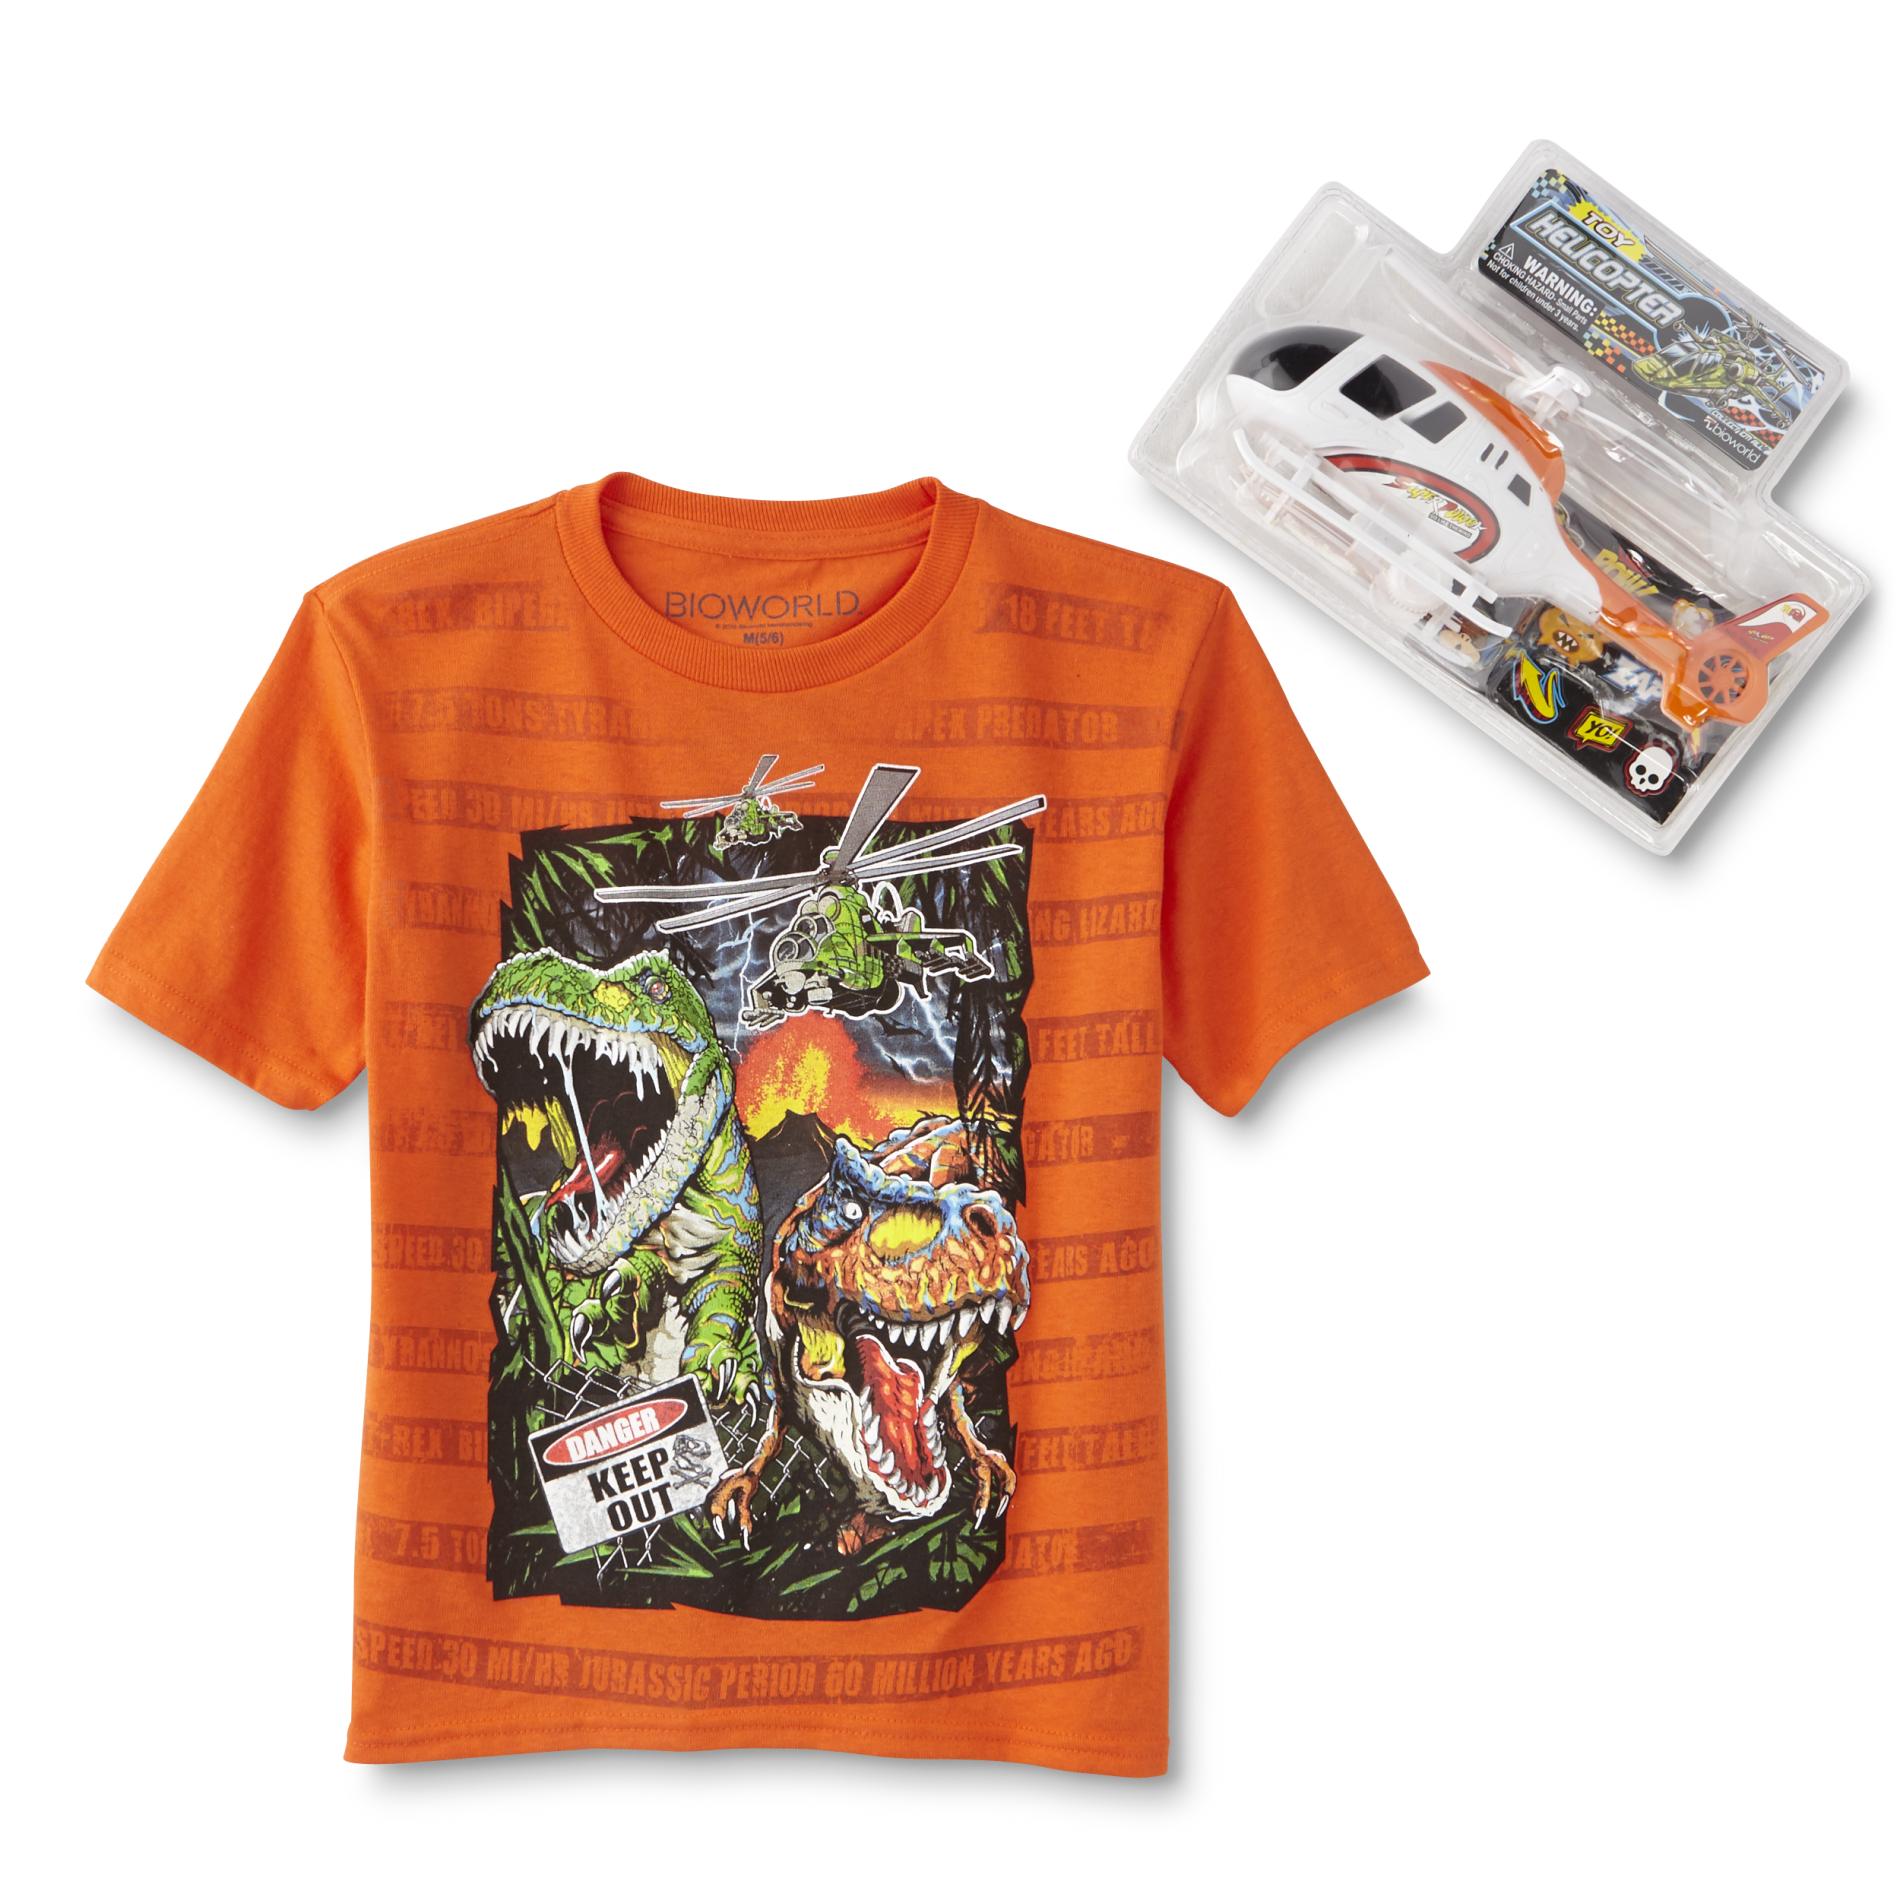 Boy's Graphic T-Shirt & Toy Helicopter